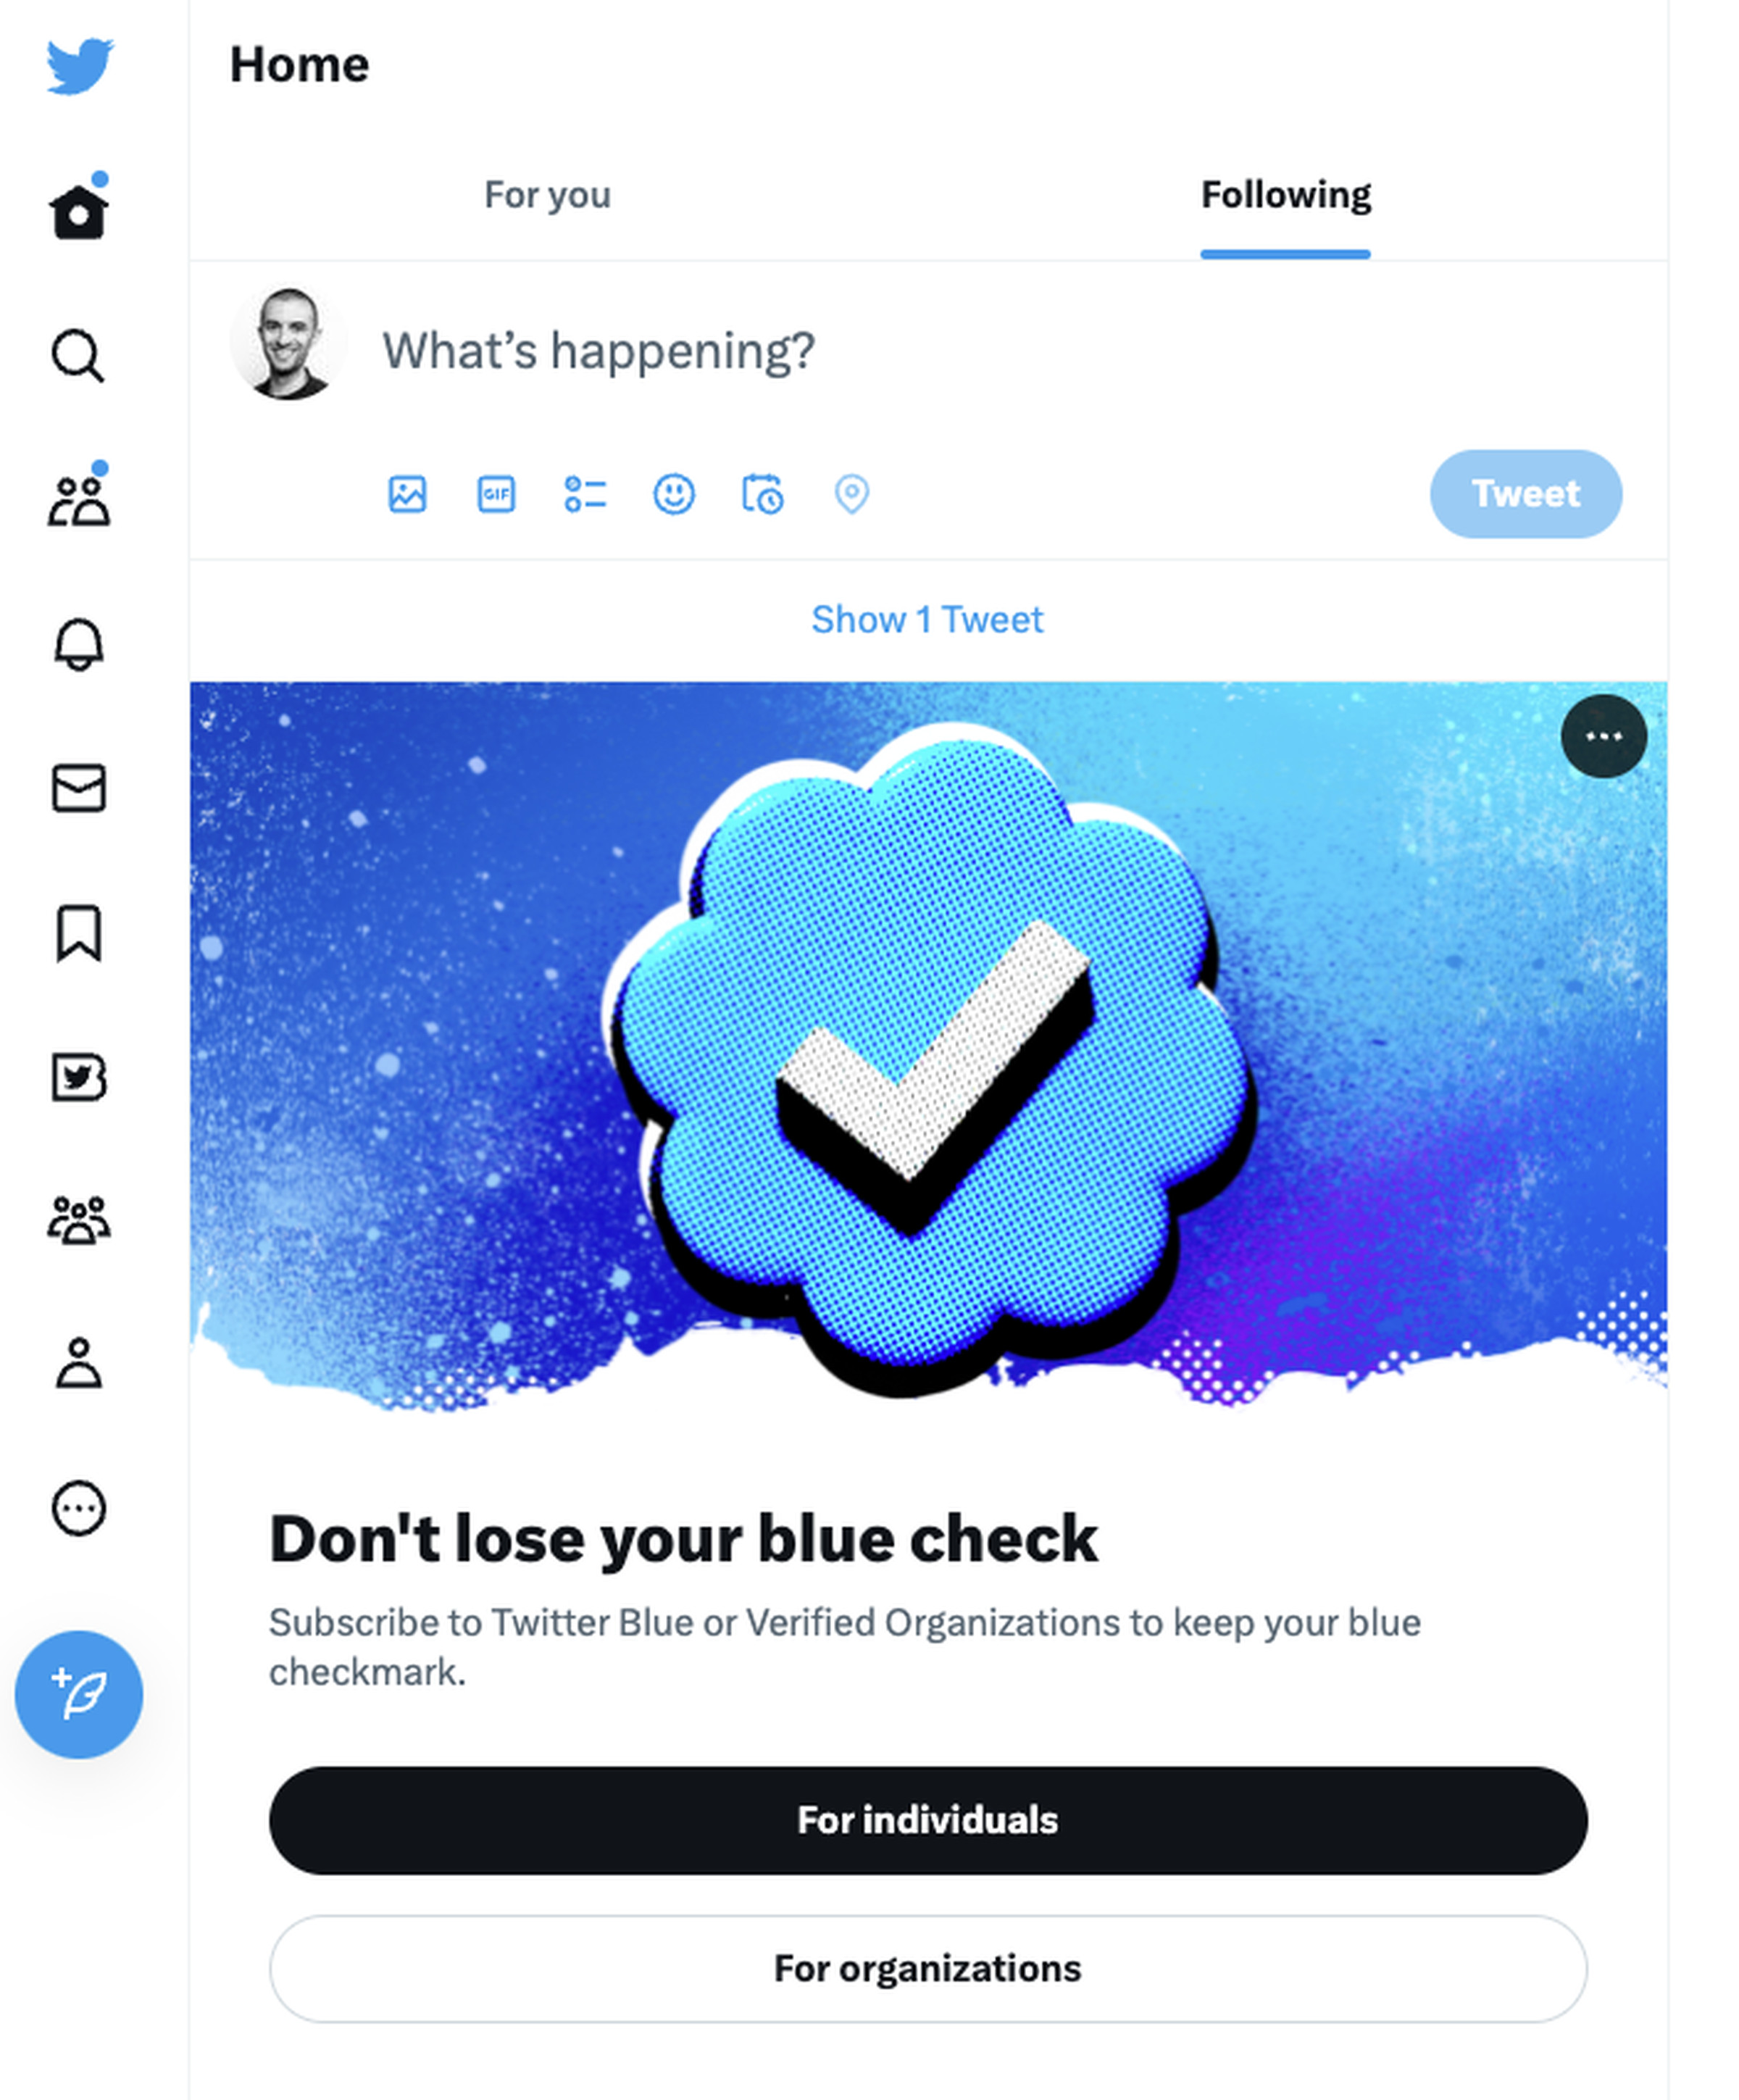 A screenshot of a Twitter timeline showing the new banner about losing a verified blue checkmark.